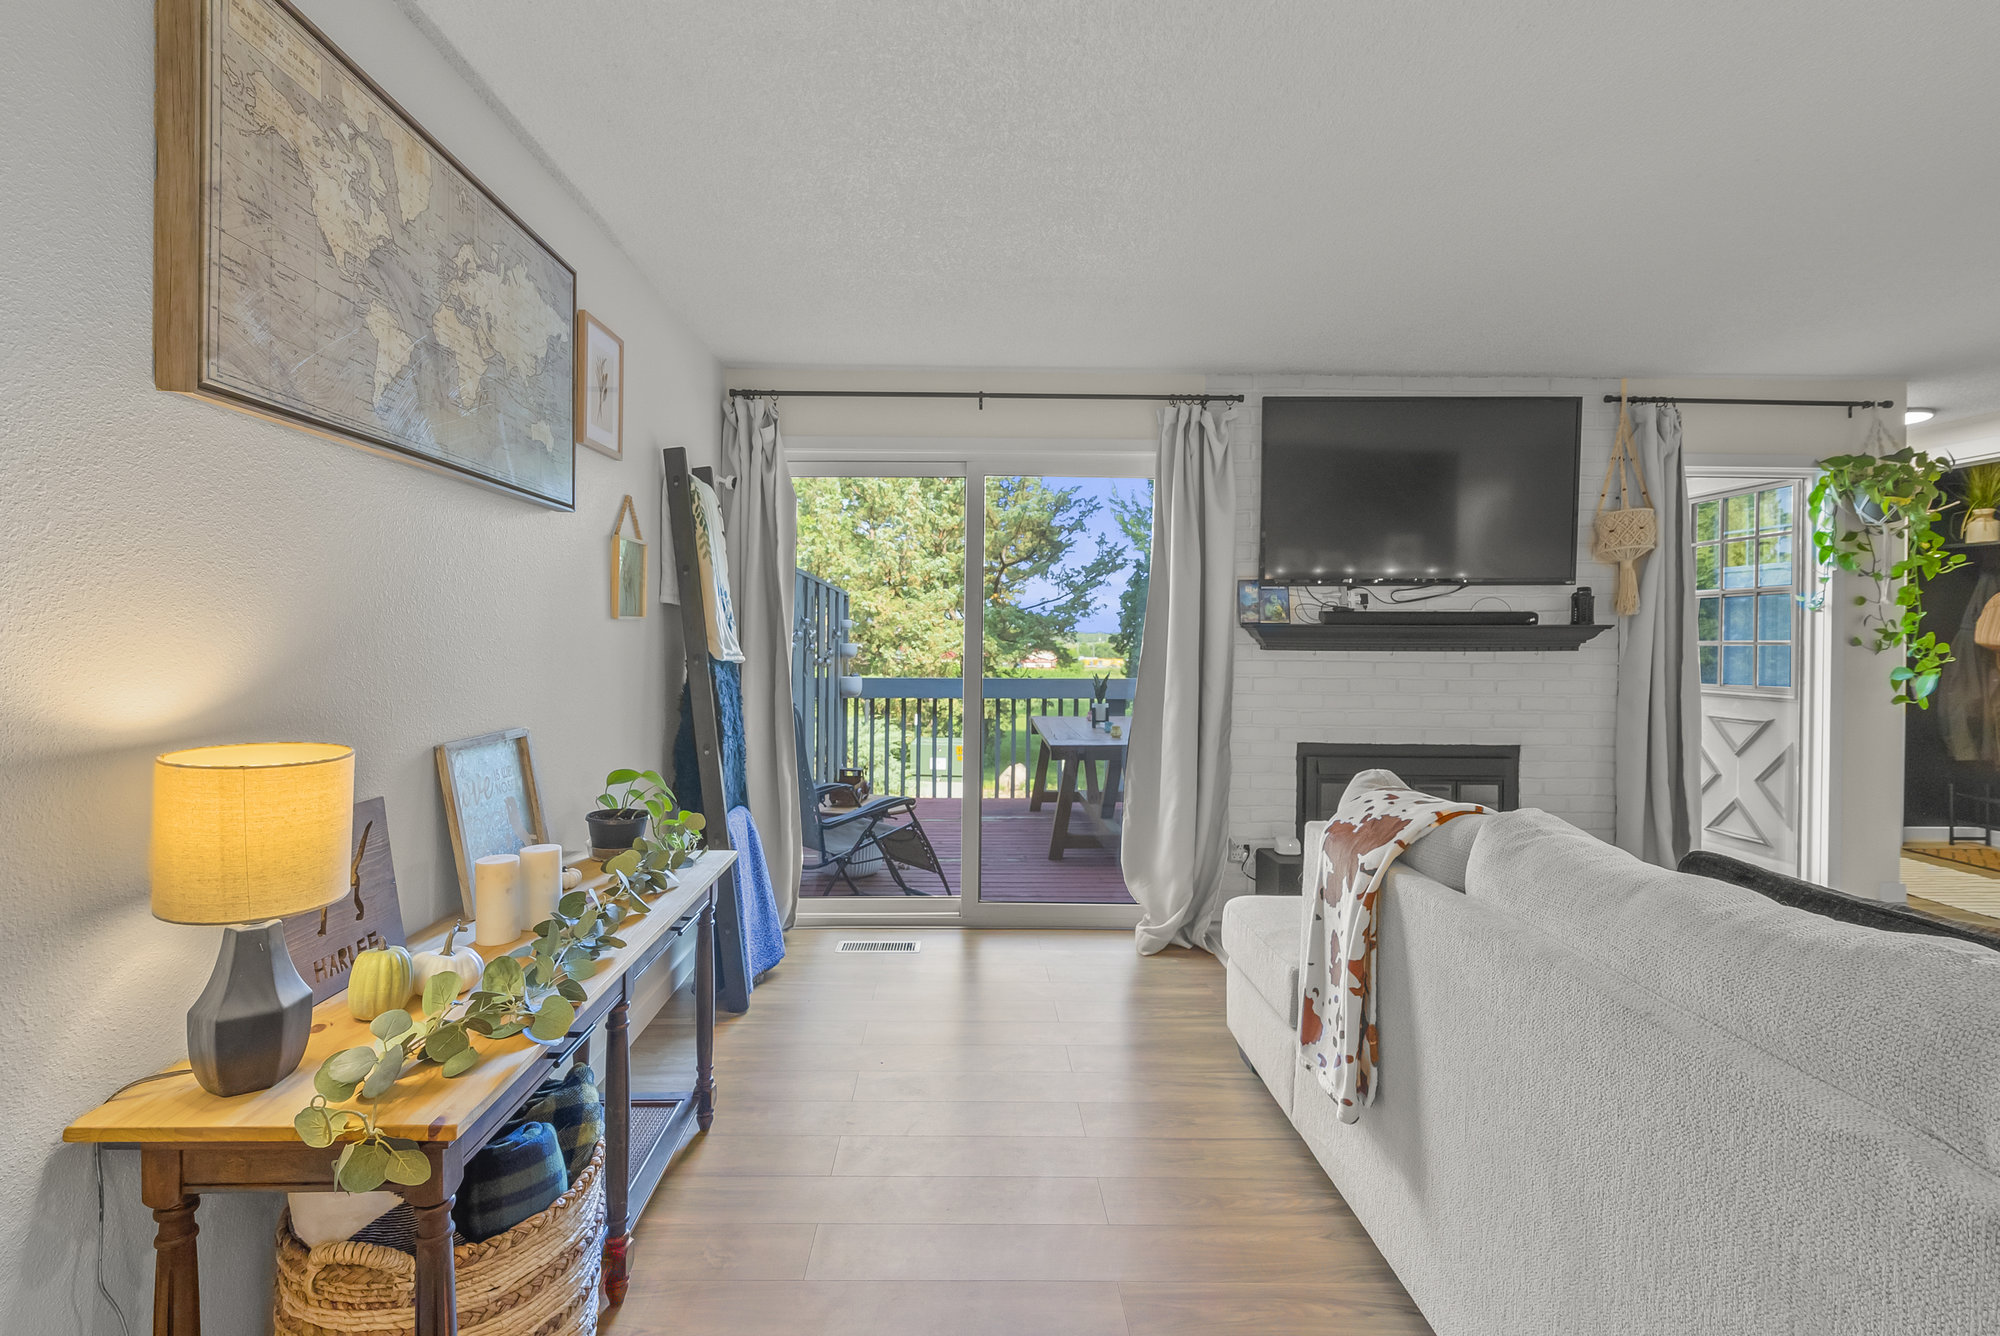 Check out this Fully Renovated & Move-In-Ready Timberline Condo in Waterloo